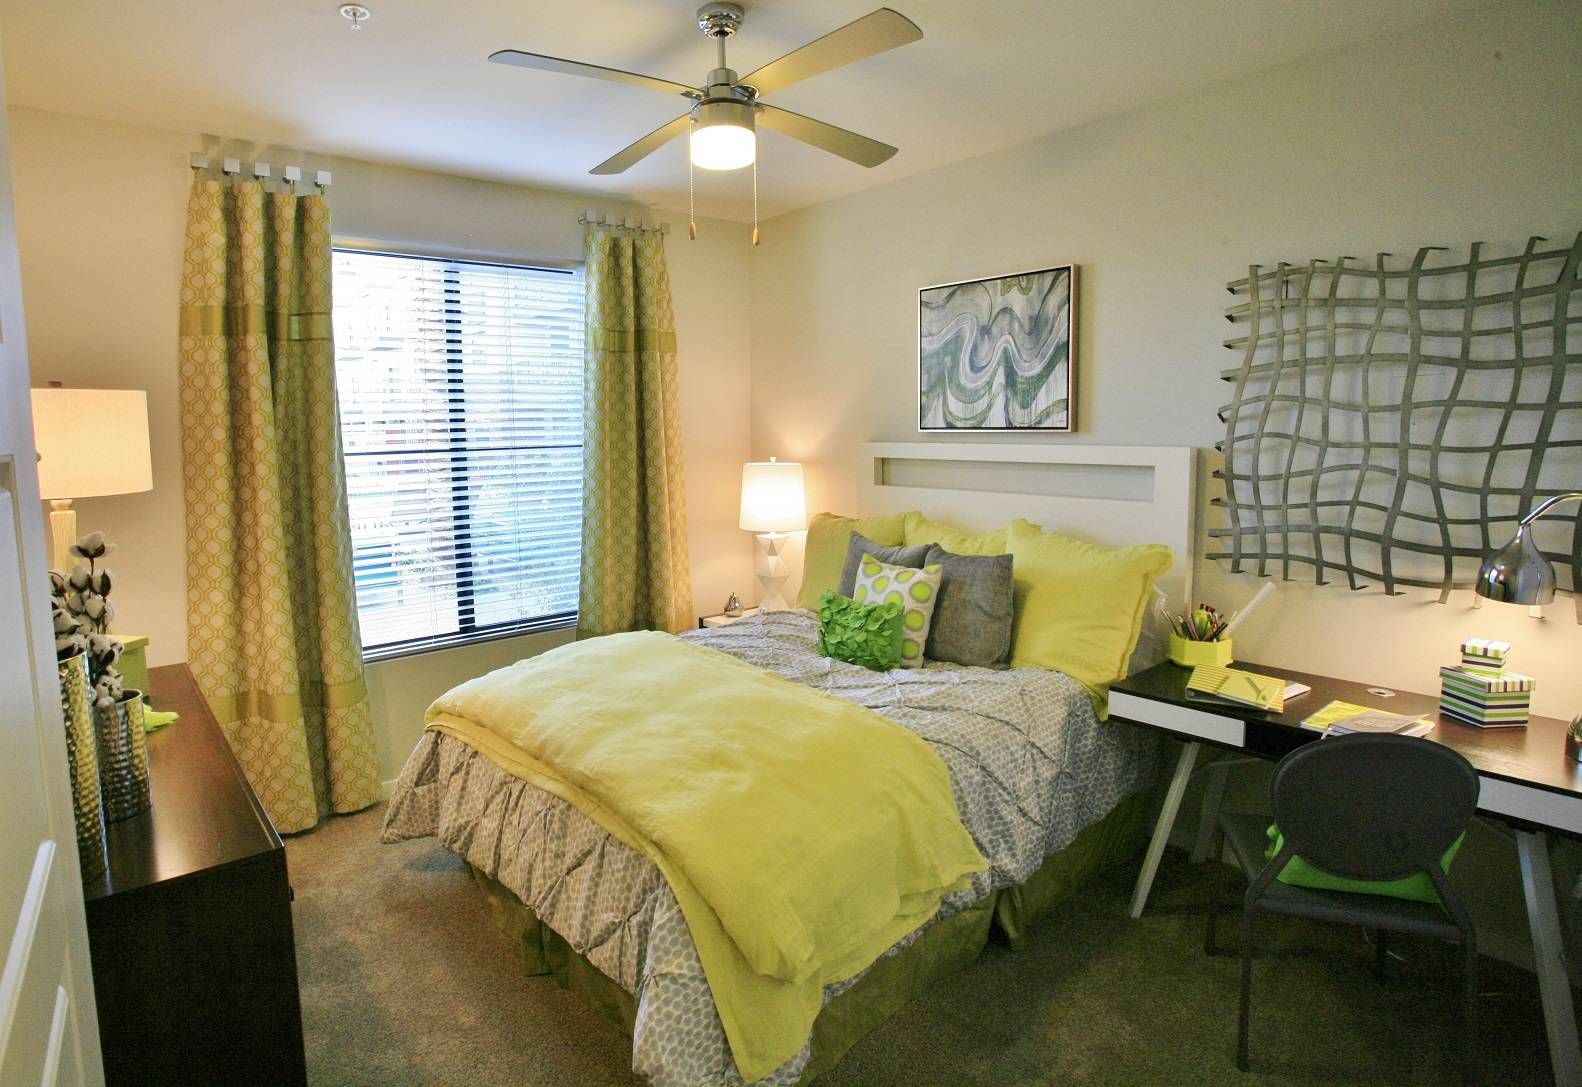 A cozy, well-lit bedroom at Alta Steelyard Lofts with yellow bedding, green curtains, and a study area.